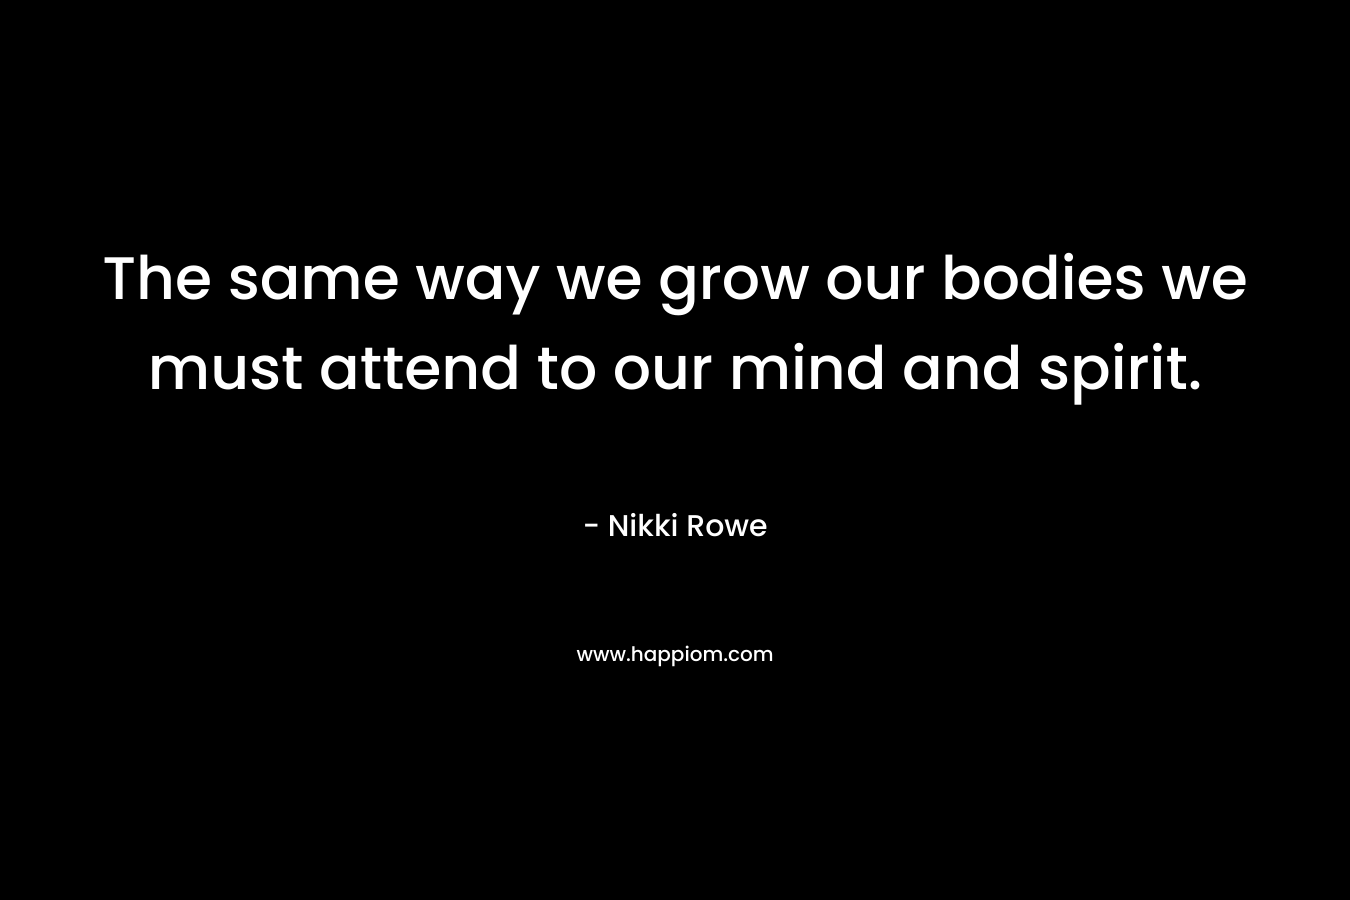 The same way we grow our bodies we must attend to our mind and spirit.